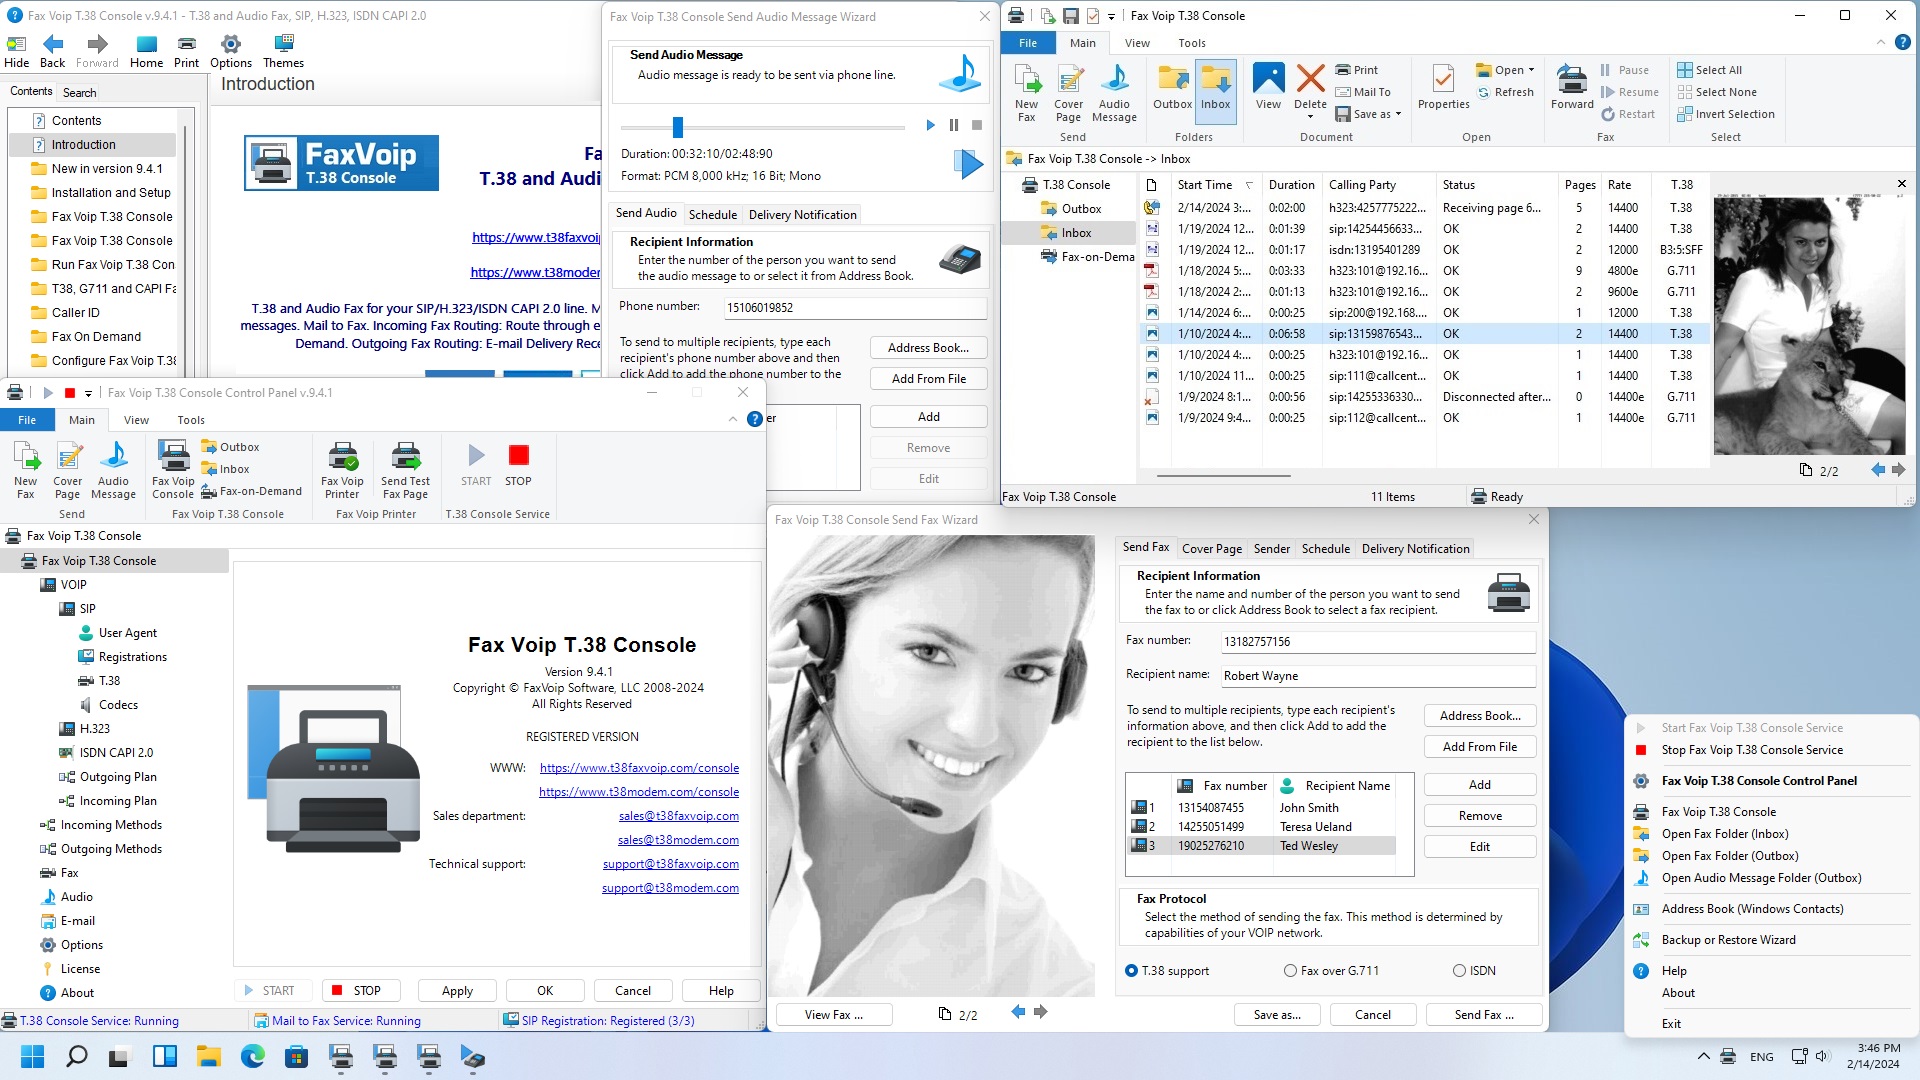 Windows 7 Fax Voip T.38 Console 9.1.1 full